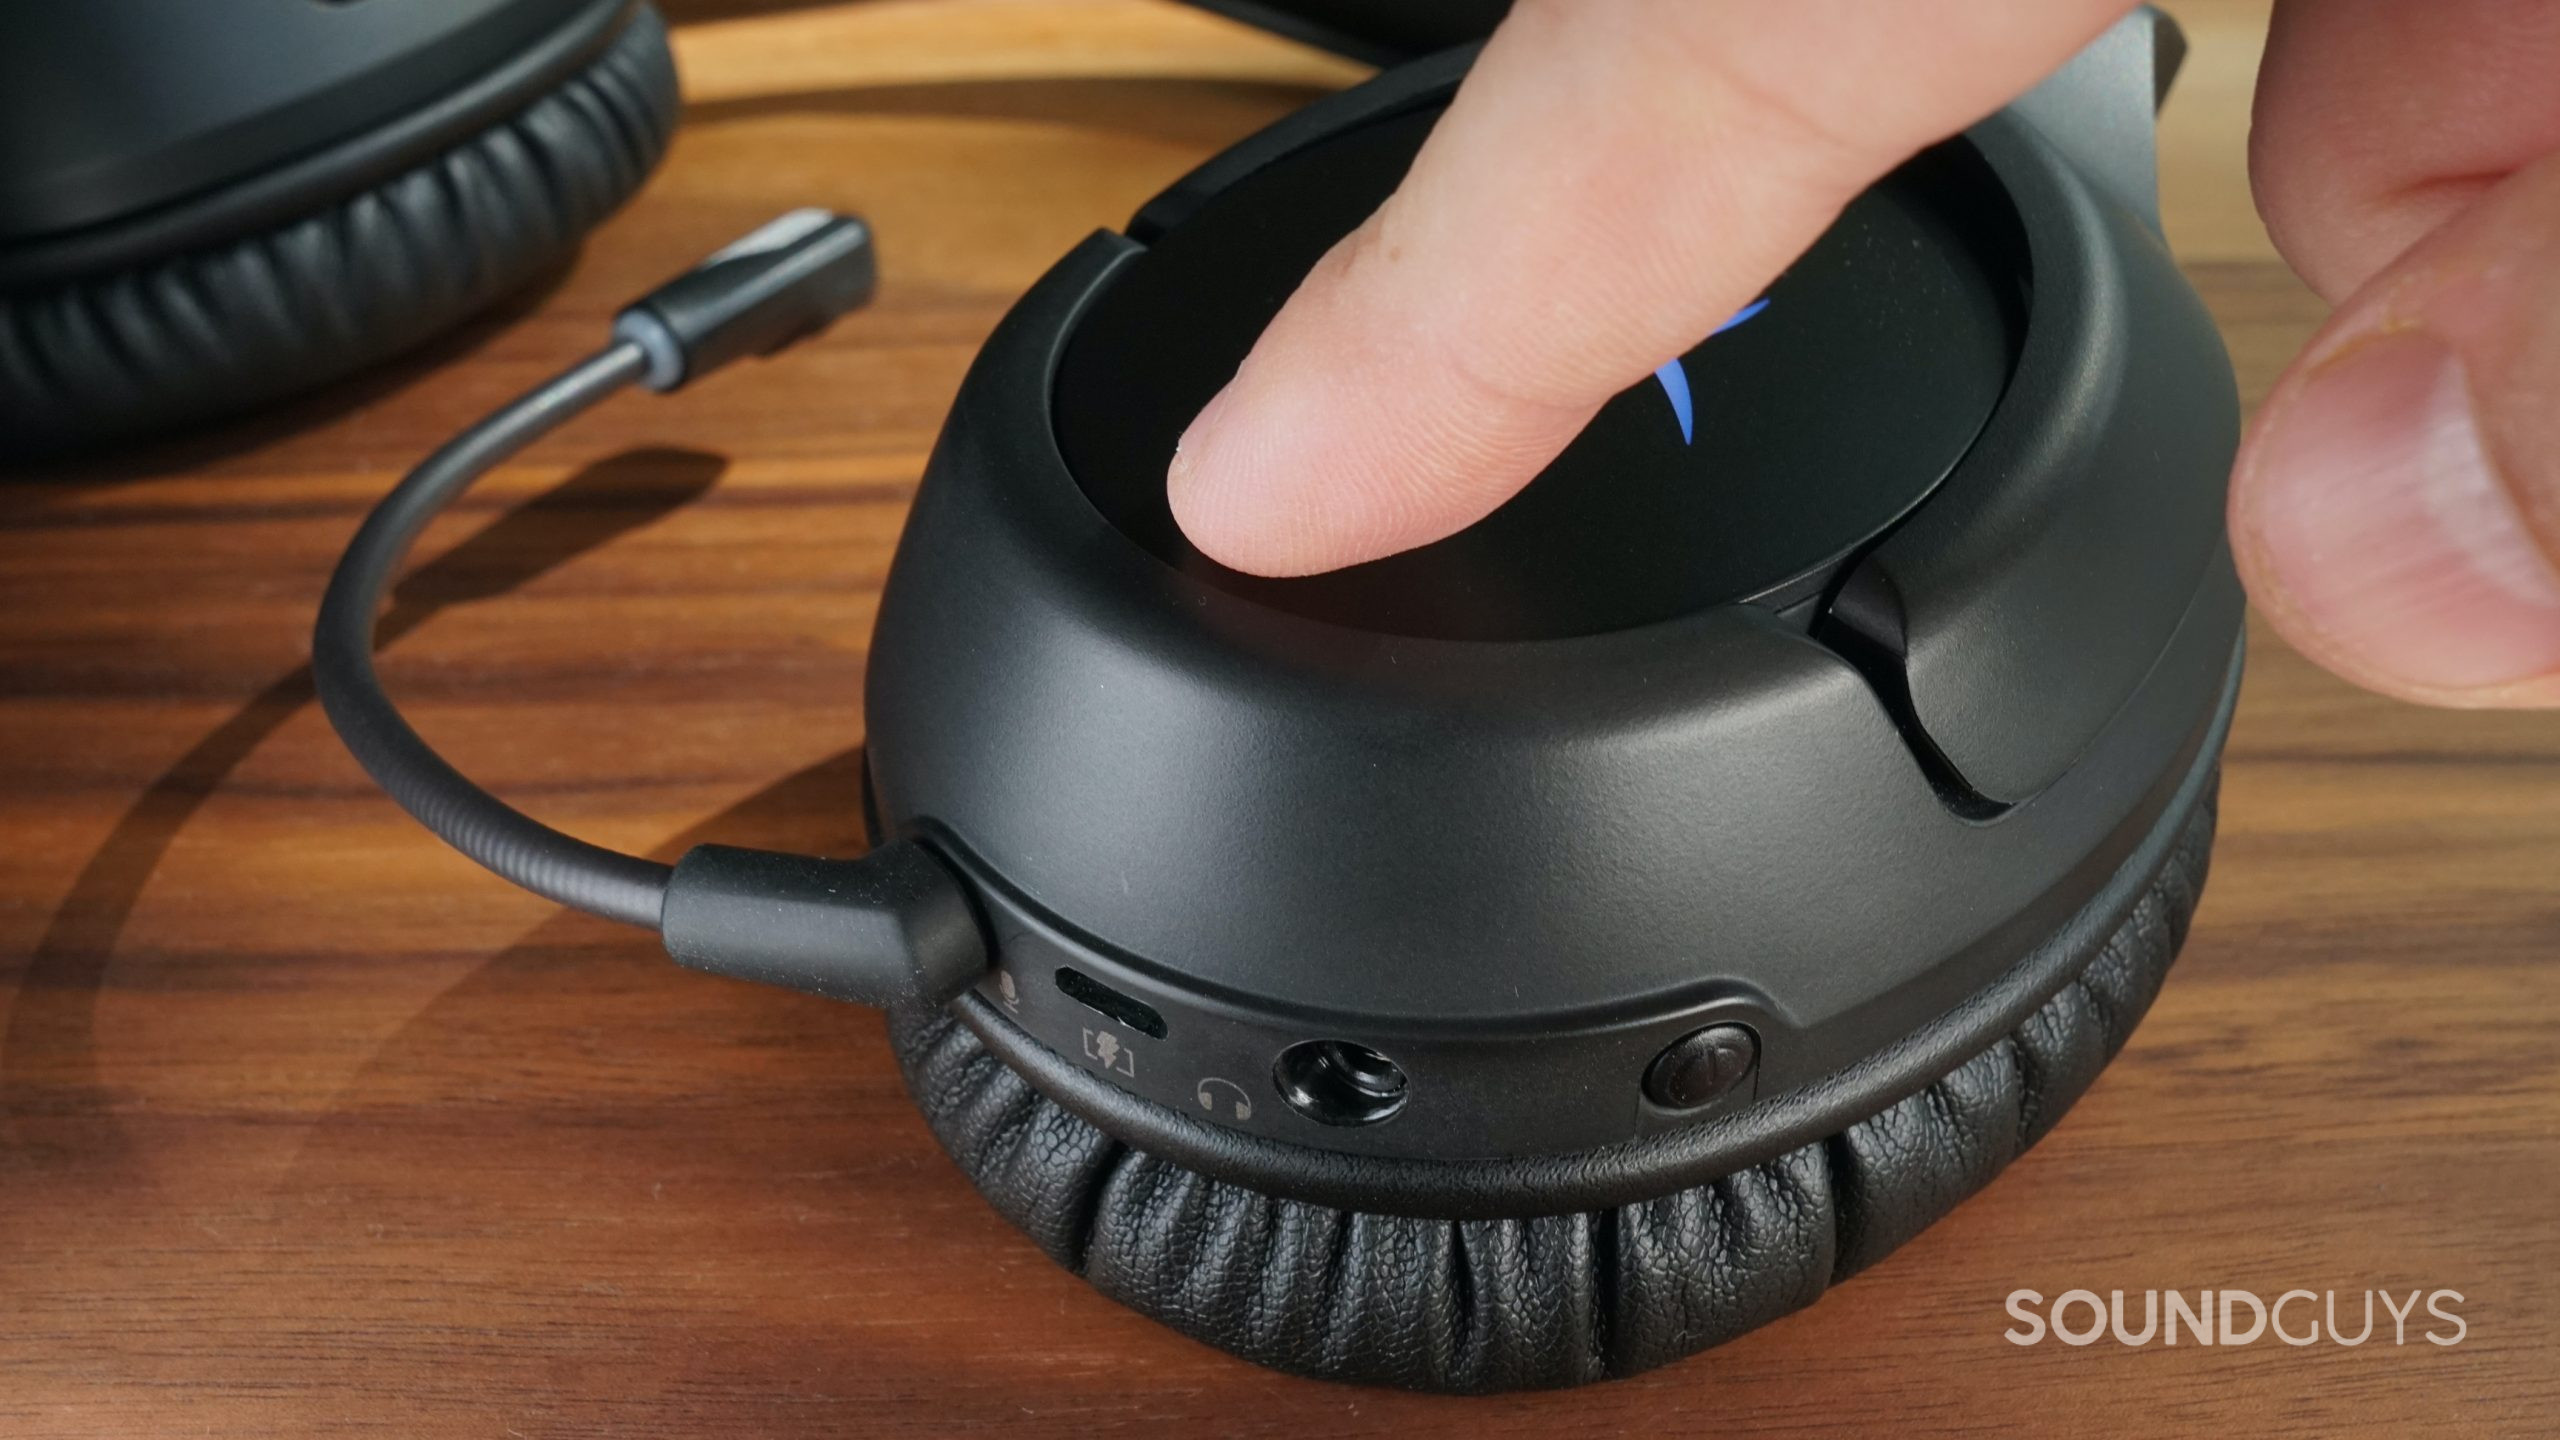 HyperX Cloud Flight Wireless PS5 and PS4 Review: Is it worth buying? -  GameRevolkution